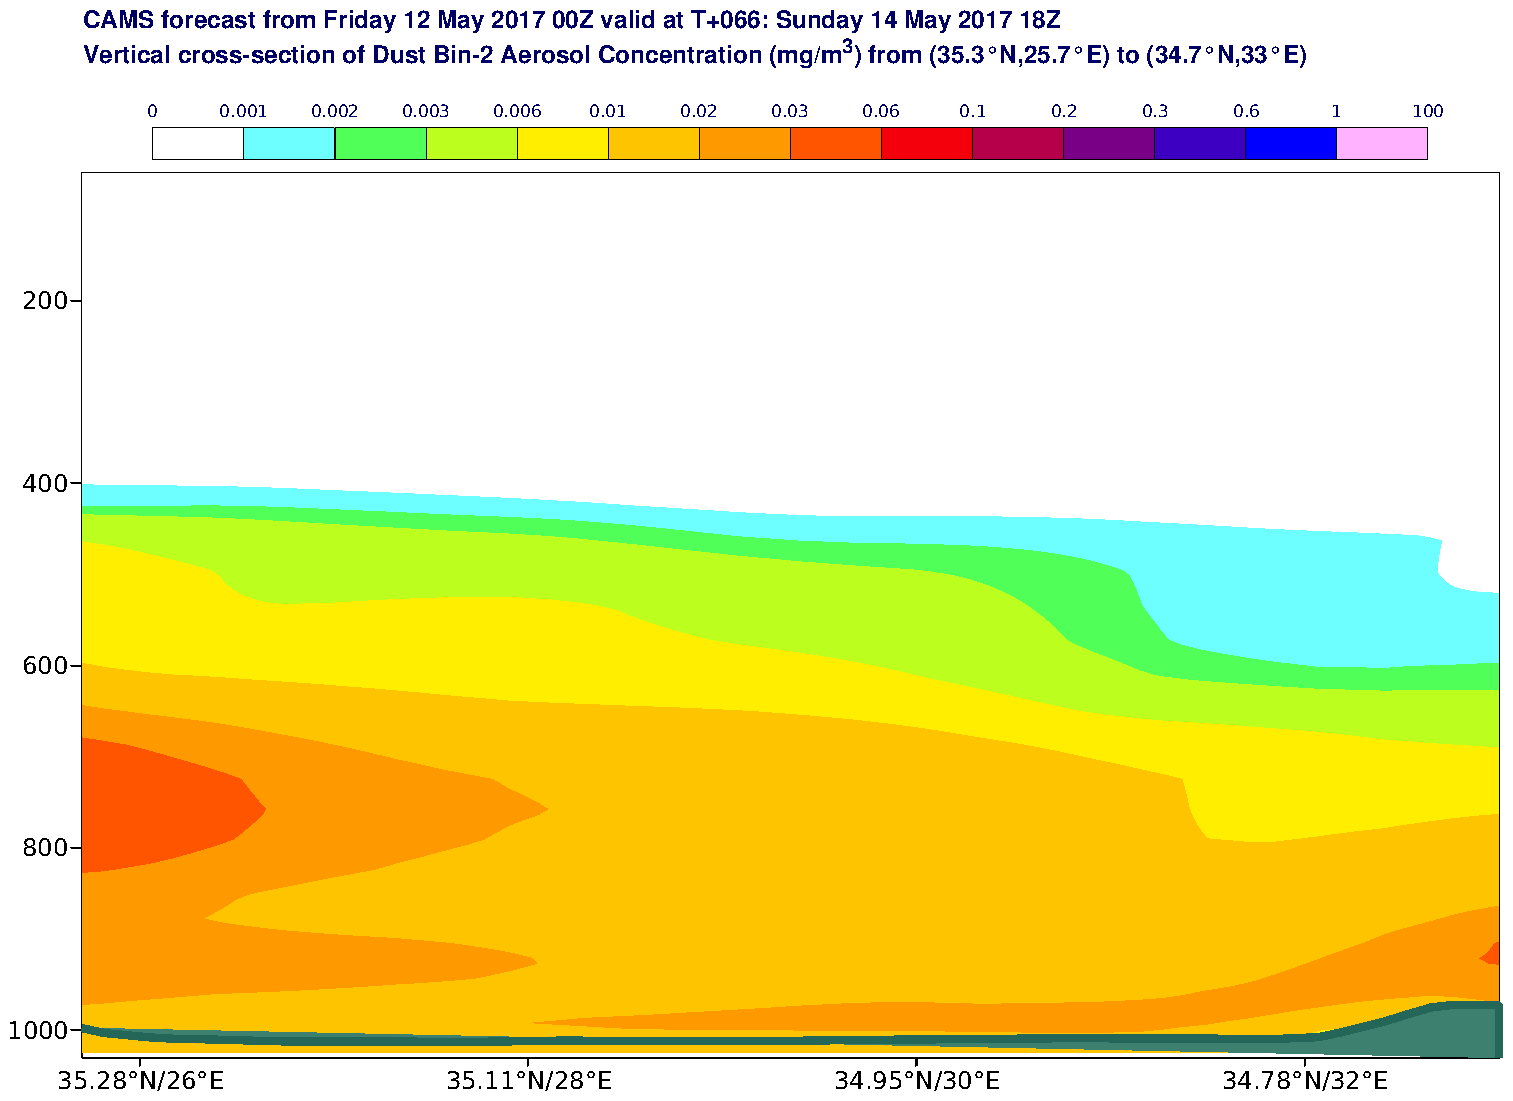 Vertical cross-section of Dust Bin-2 Aerosol Concentration (mg/m3) valid at T66 - 2017-05-14 18:00